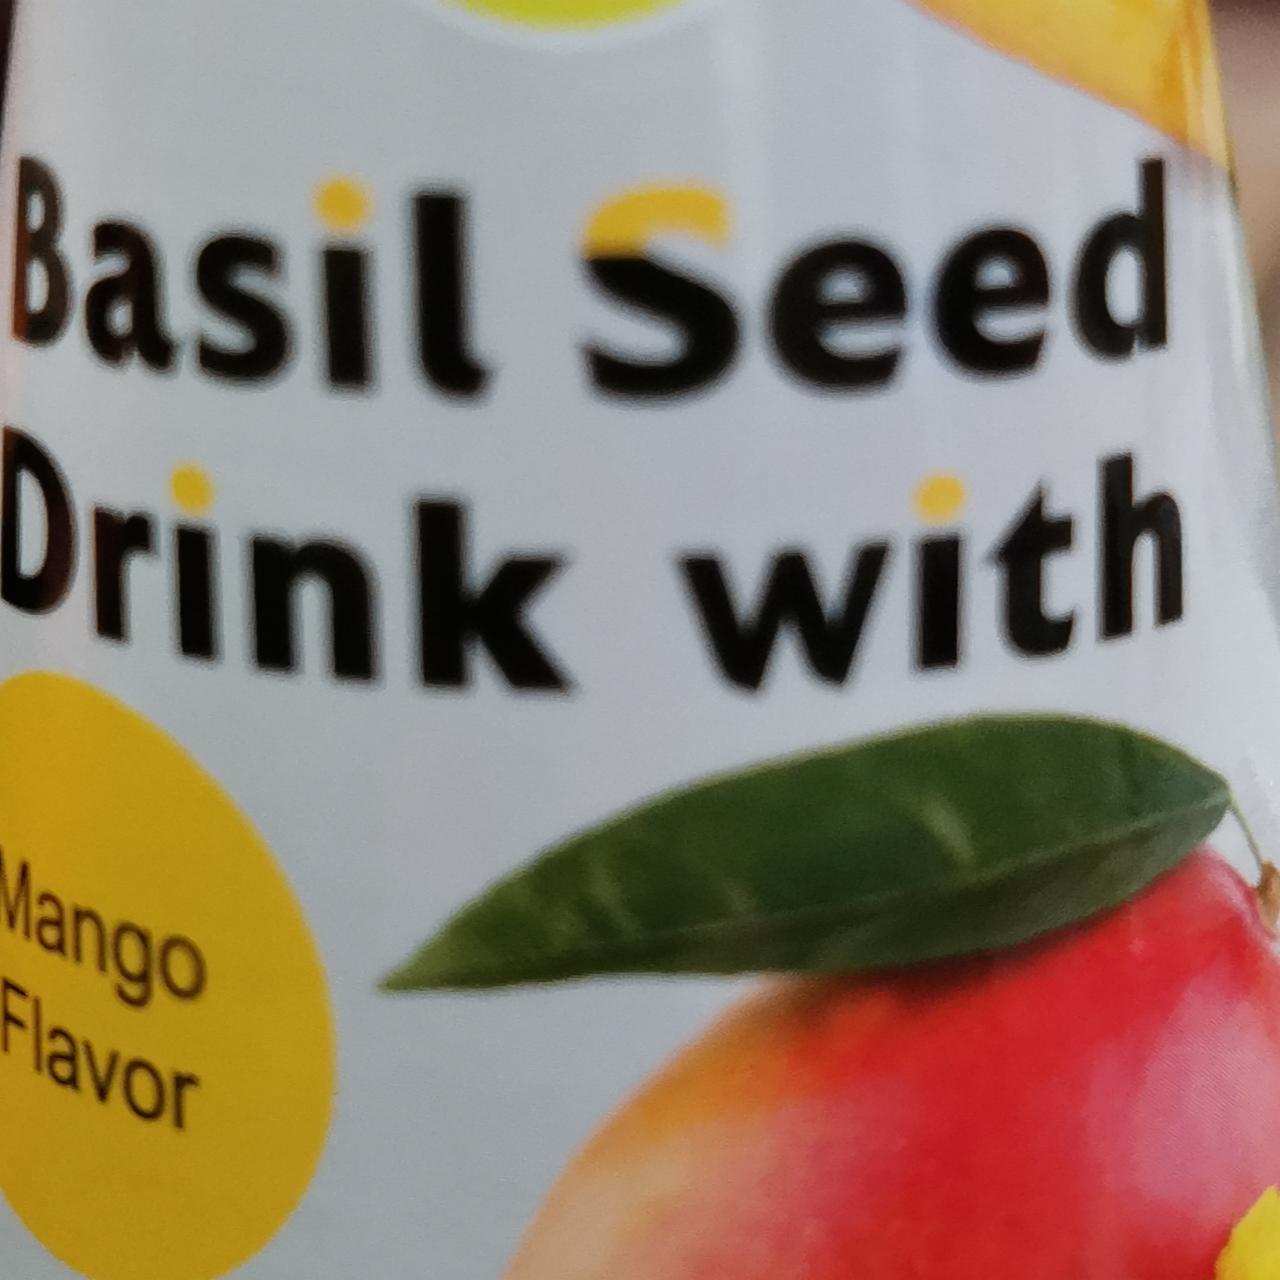 Fotografie - Basil seed drink with mango flavor